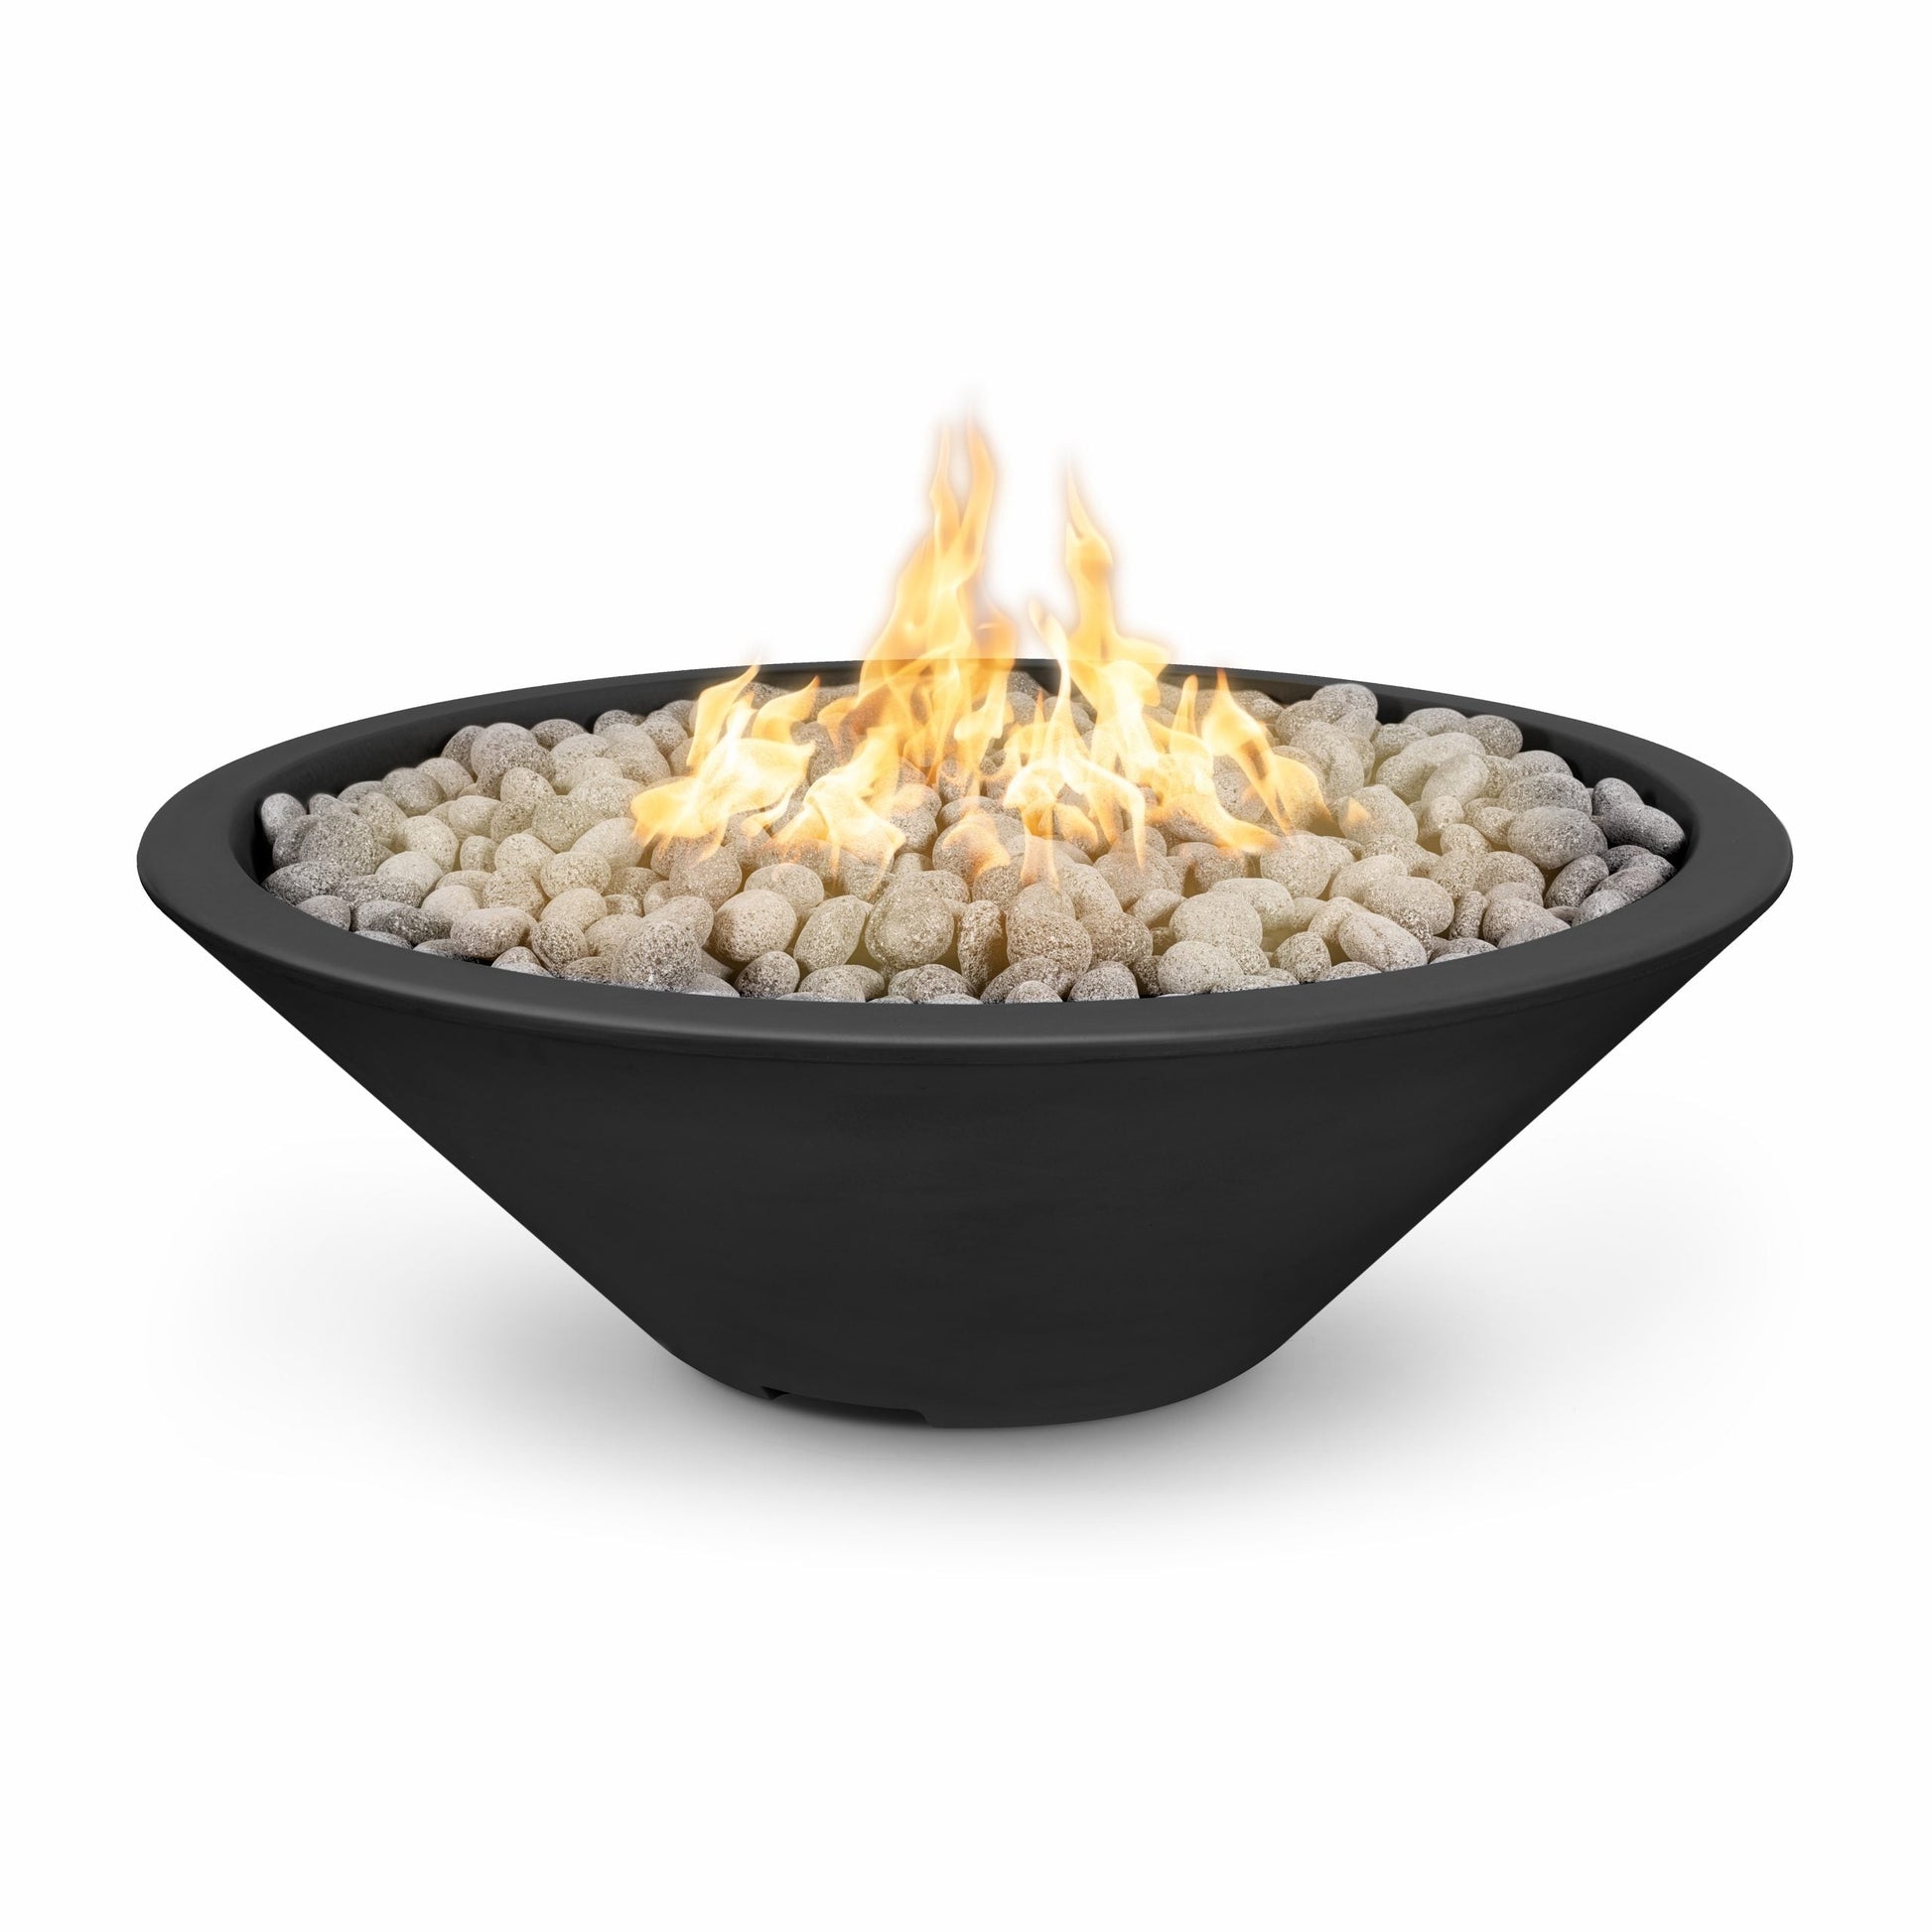 The Outdoor Plus Round Cazo 60" Copper Vein Powder Coated Metal Liquid Propane Fire Pit with Match Lit Ignition